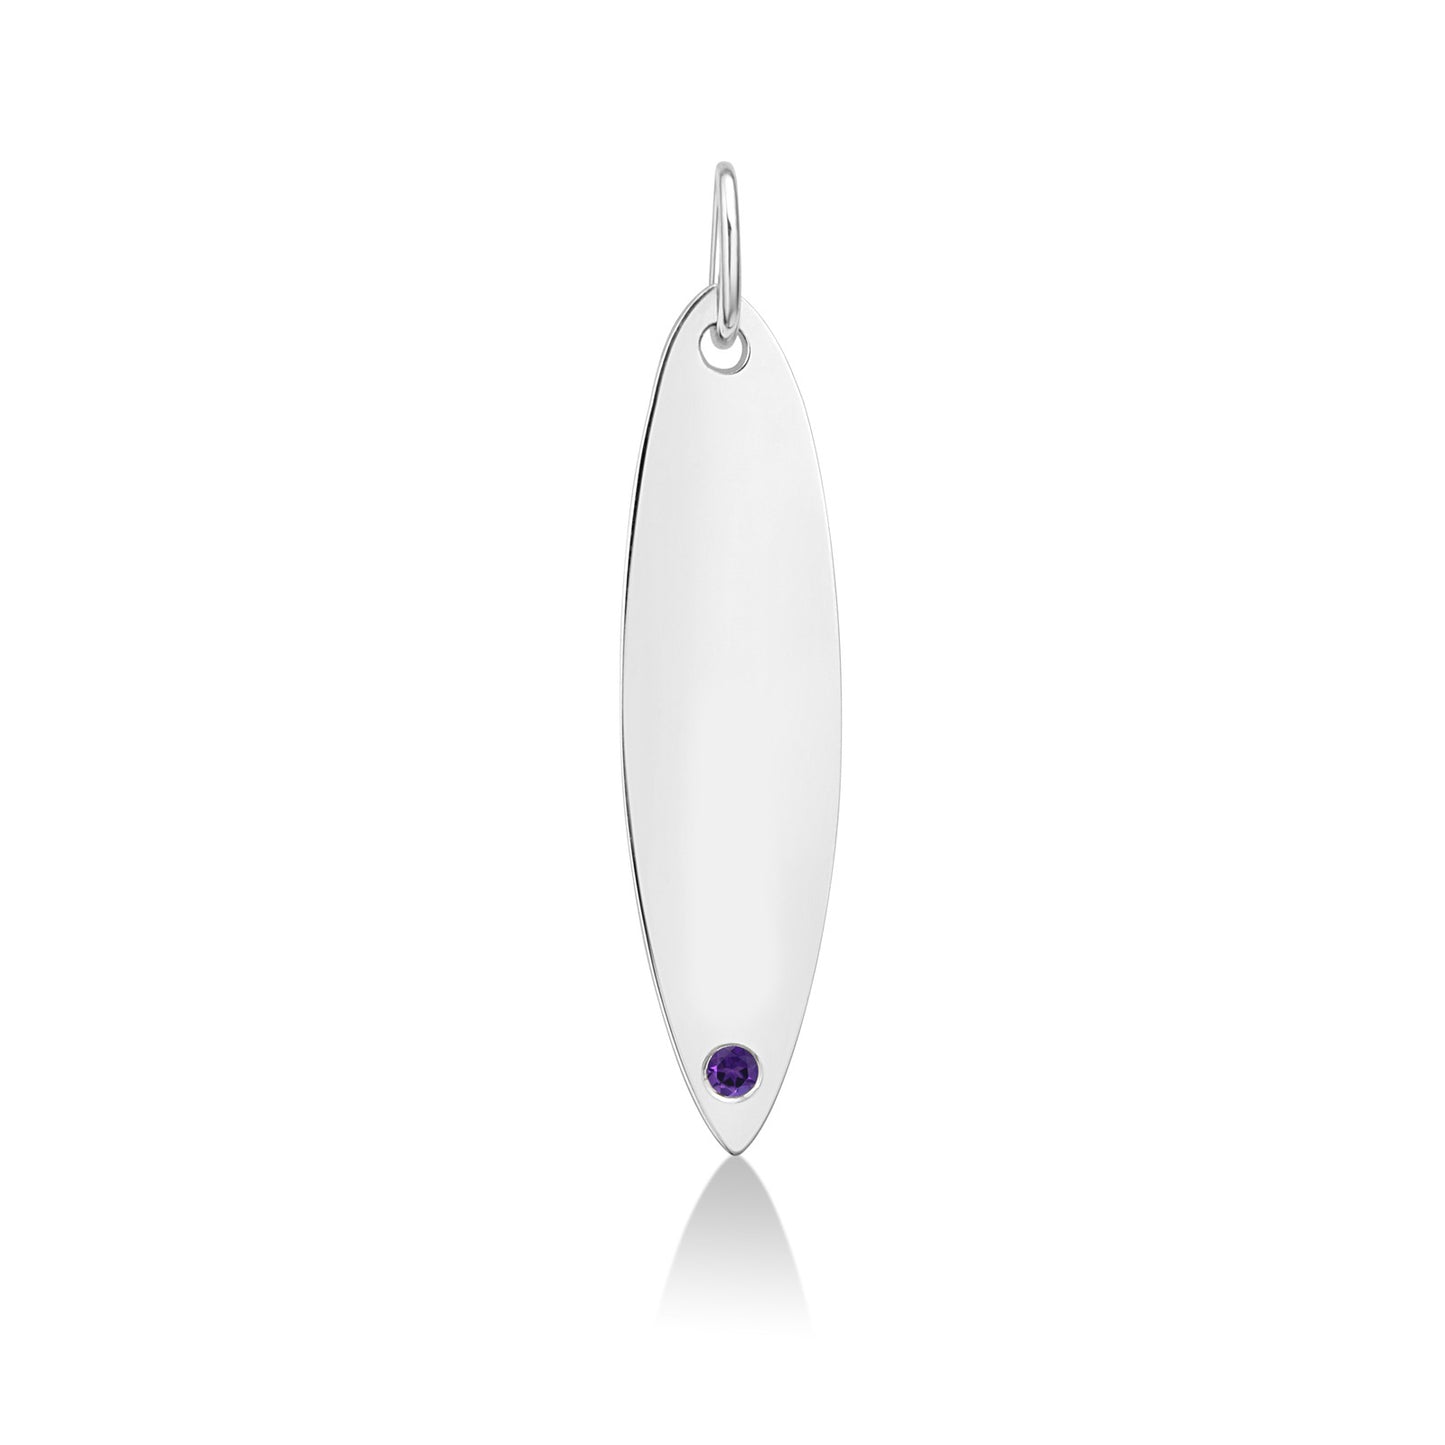 14k white gold surfboard charm lock with amethyst